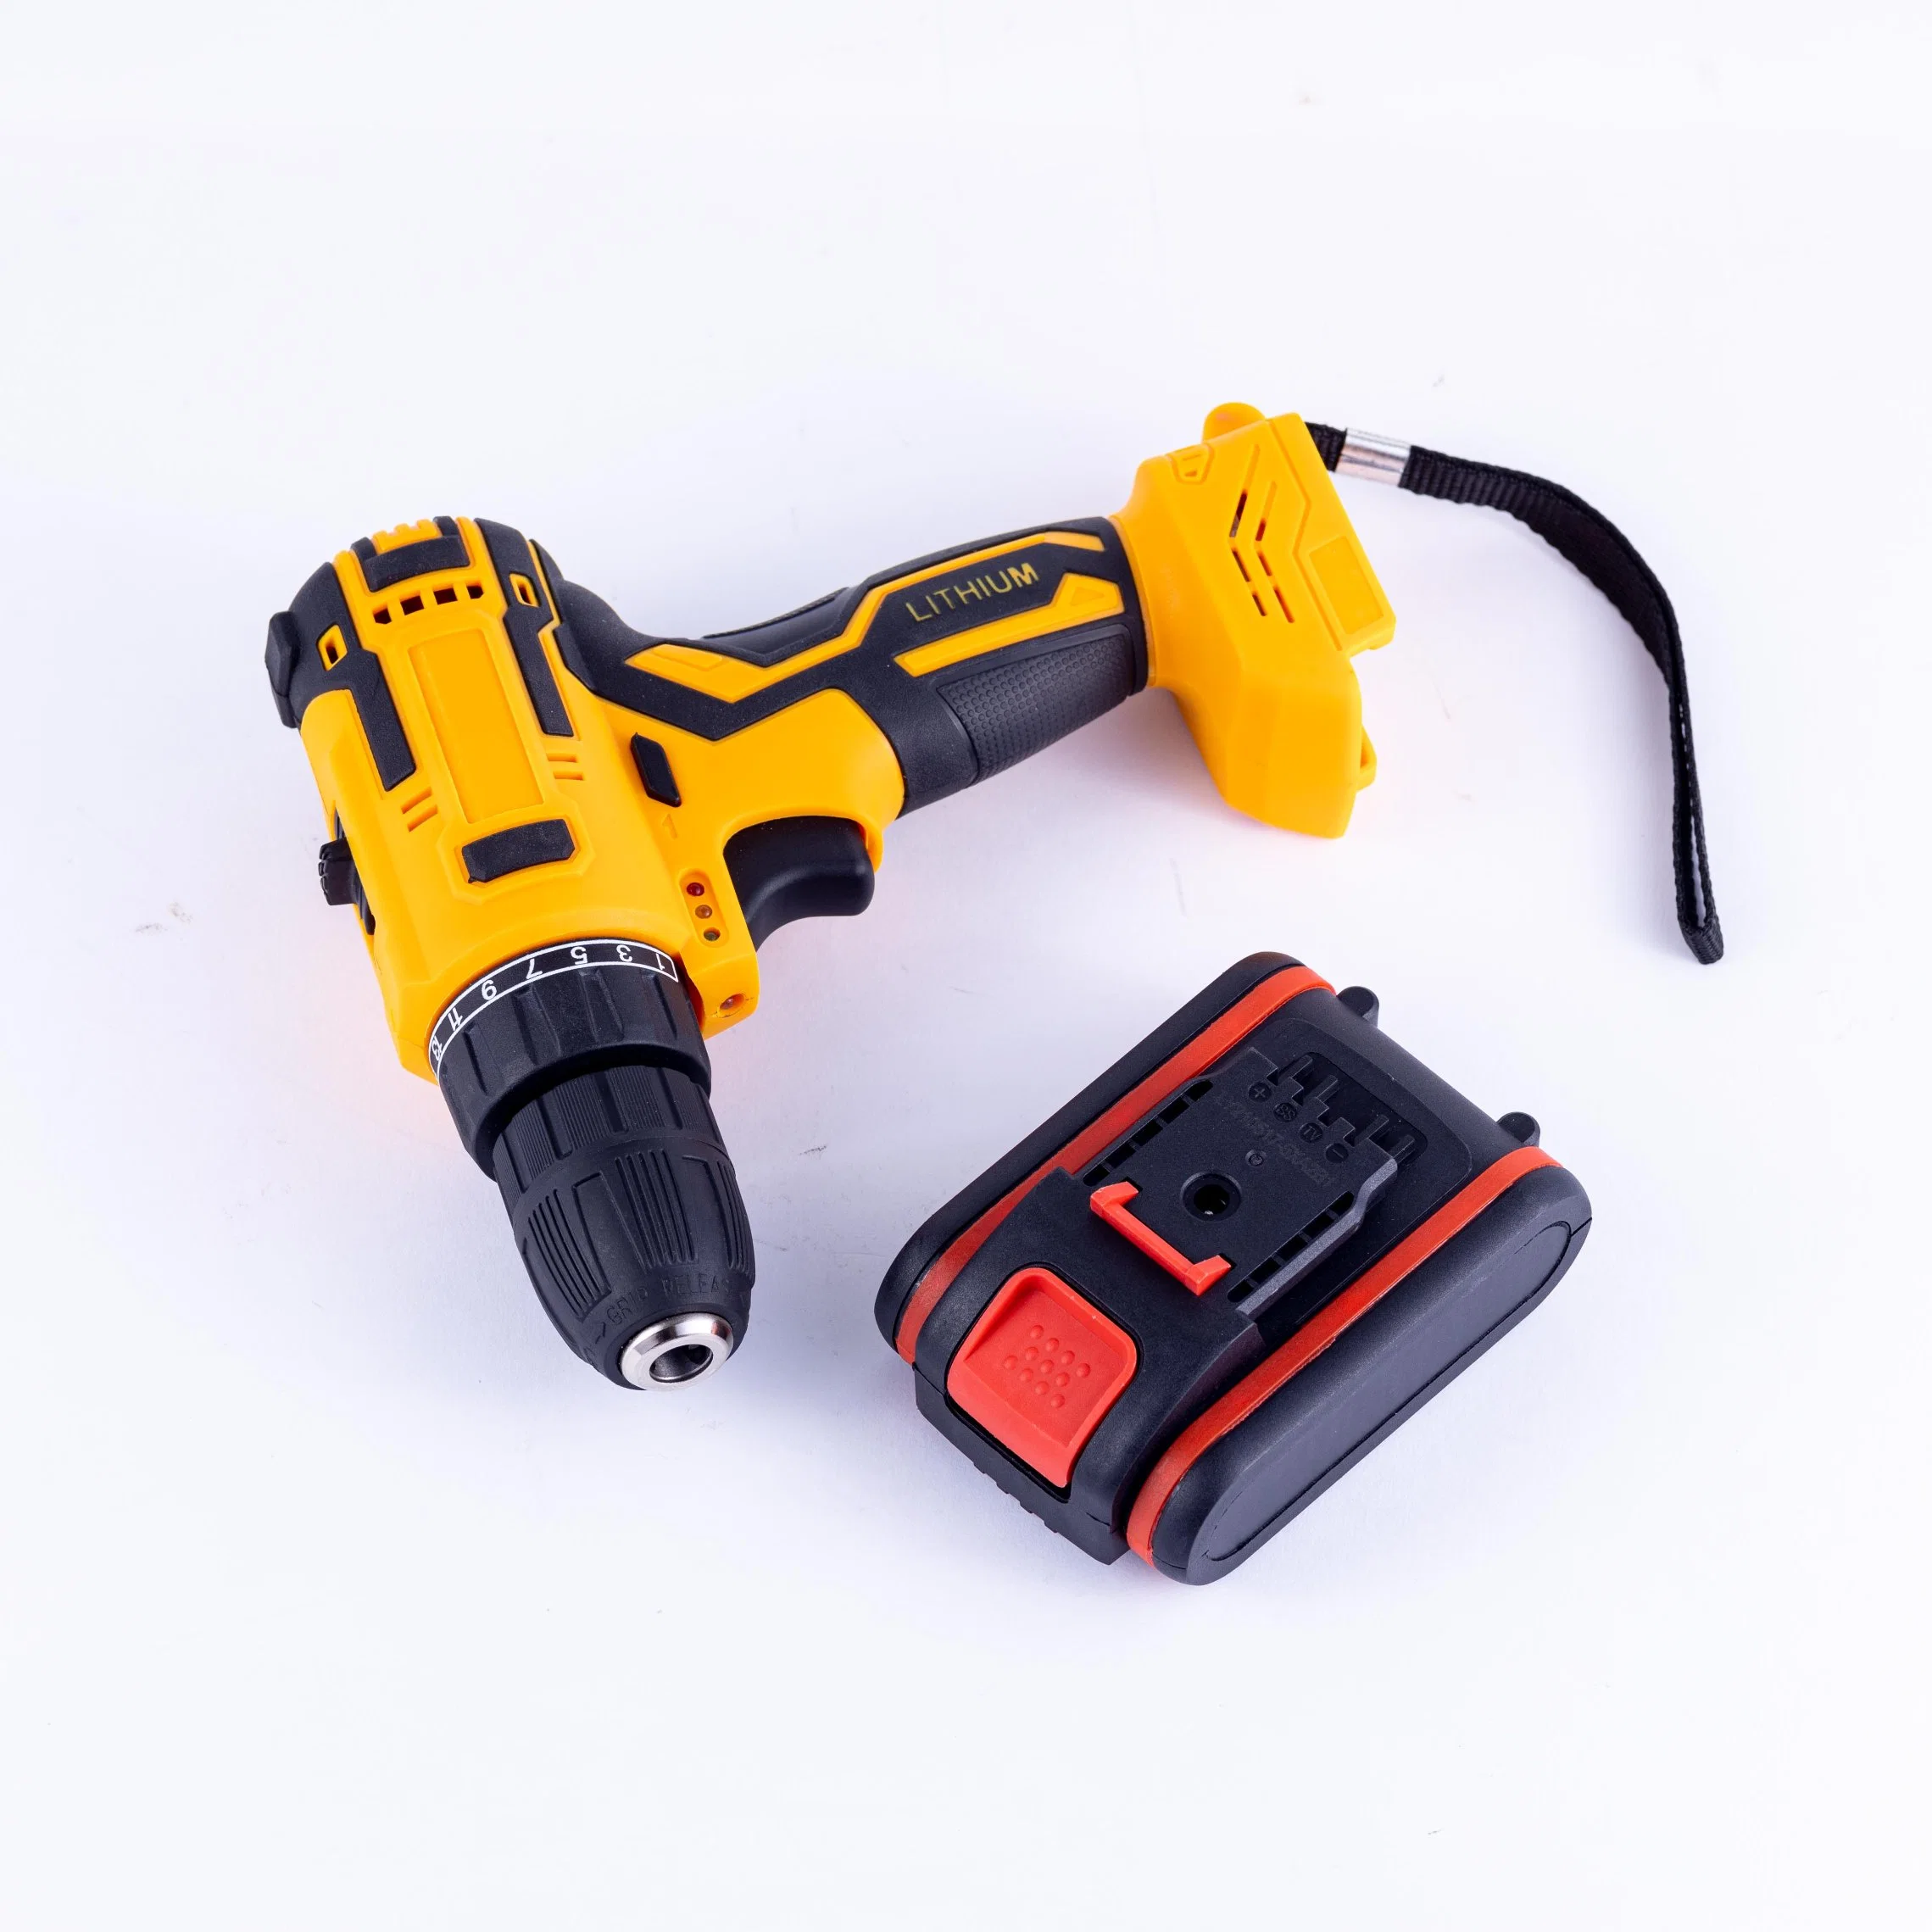 21V Impact Cordless Brushless Compact Drill Electric Tool Power Tool with 2-Speed Lithium-Ion Battery Drill Driver